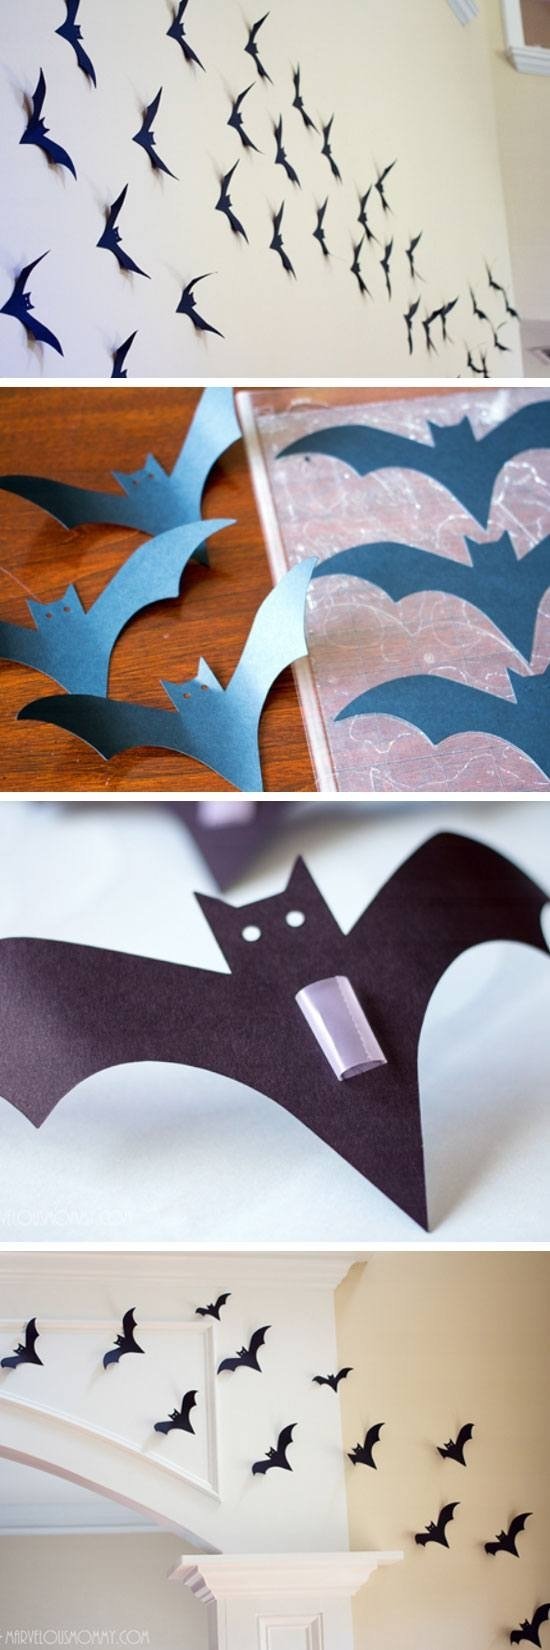 10 Attractive Halloween Decorating Ideas For Kids 25 diy halloween decorating ideas for kids on a budget 2022